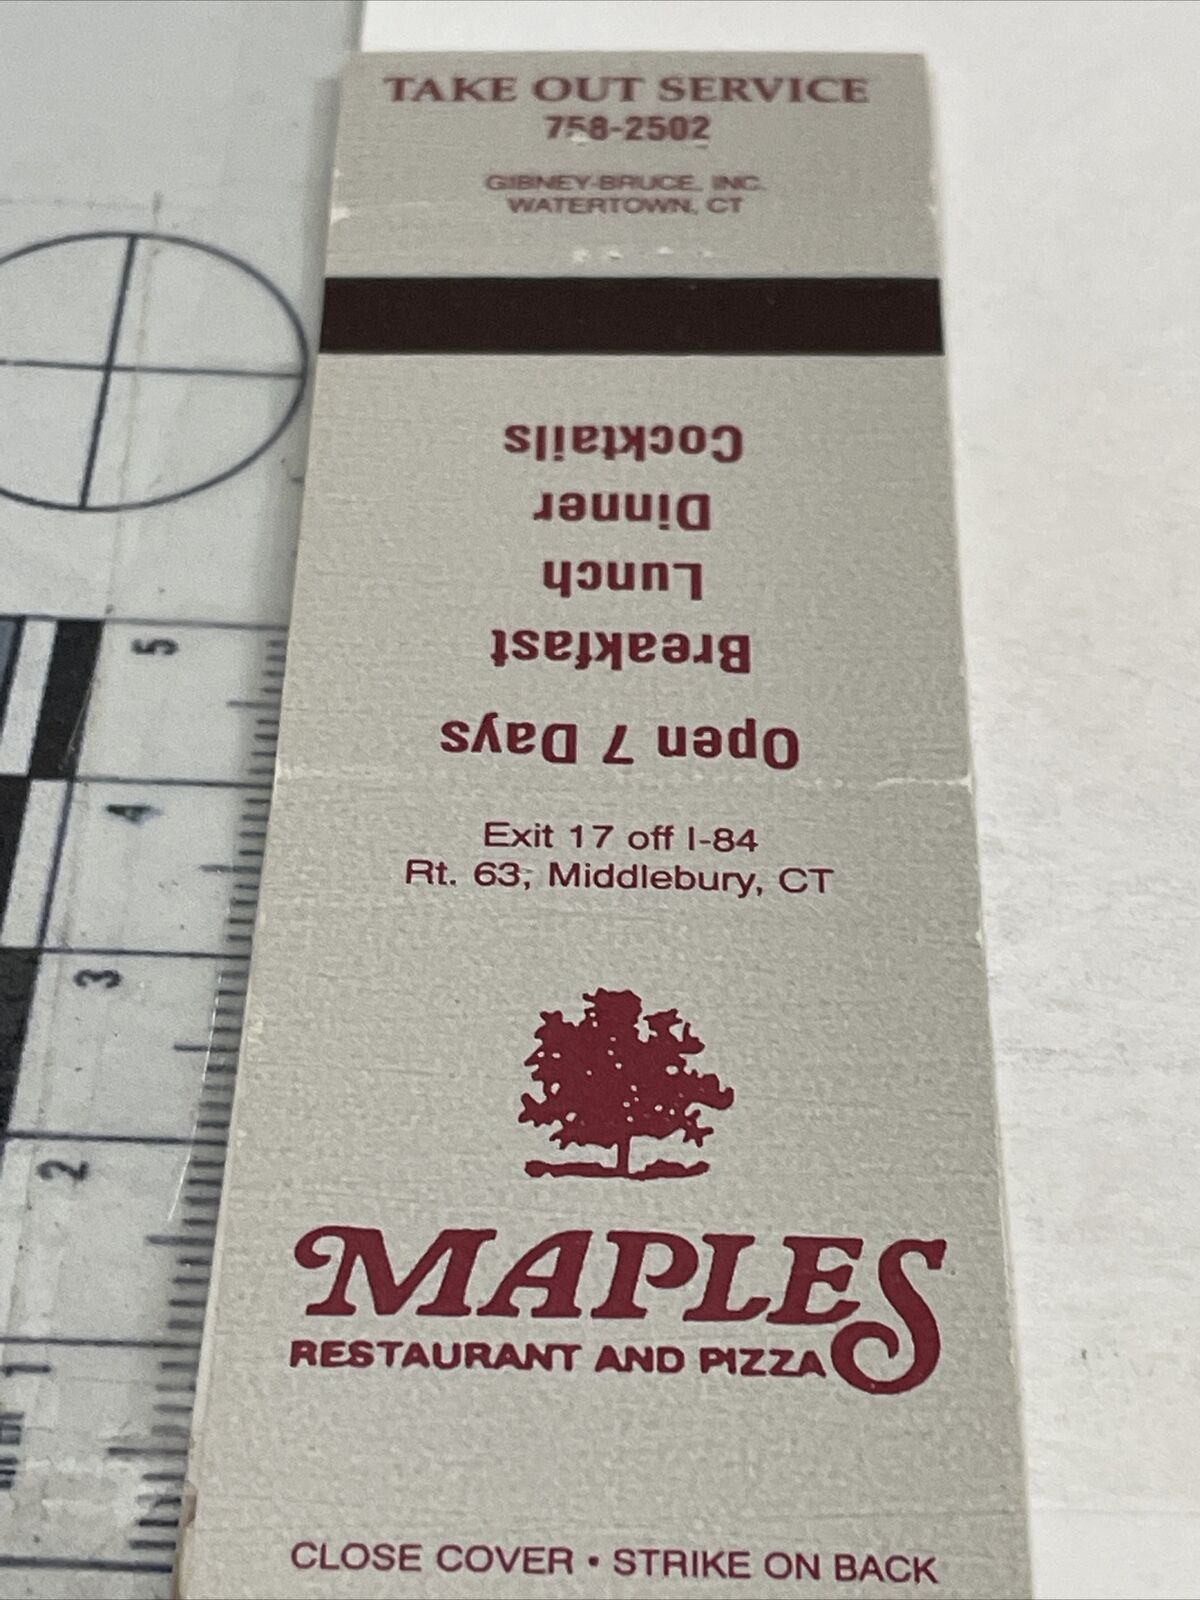 Vintage Matchbook Cover Maple’s Restaurant and Pizza  Watertown, CT gmg Unstruck